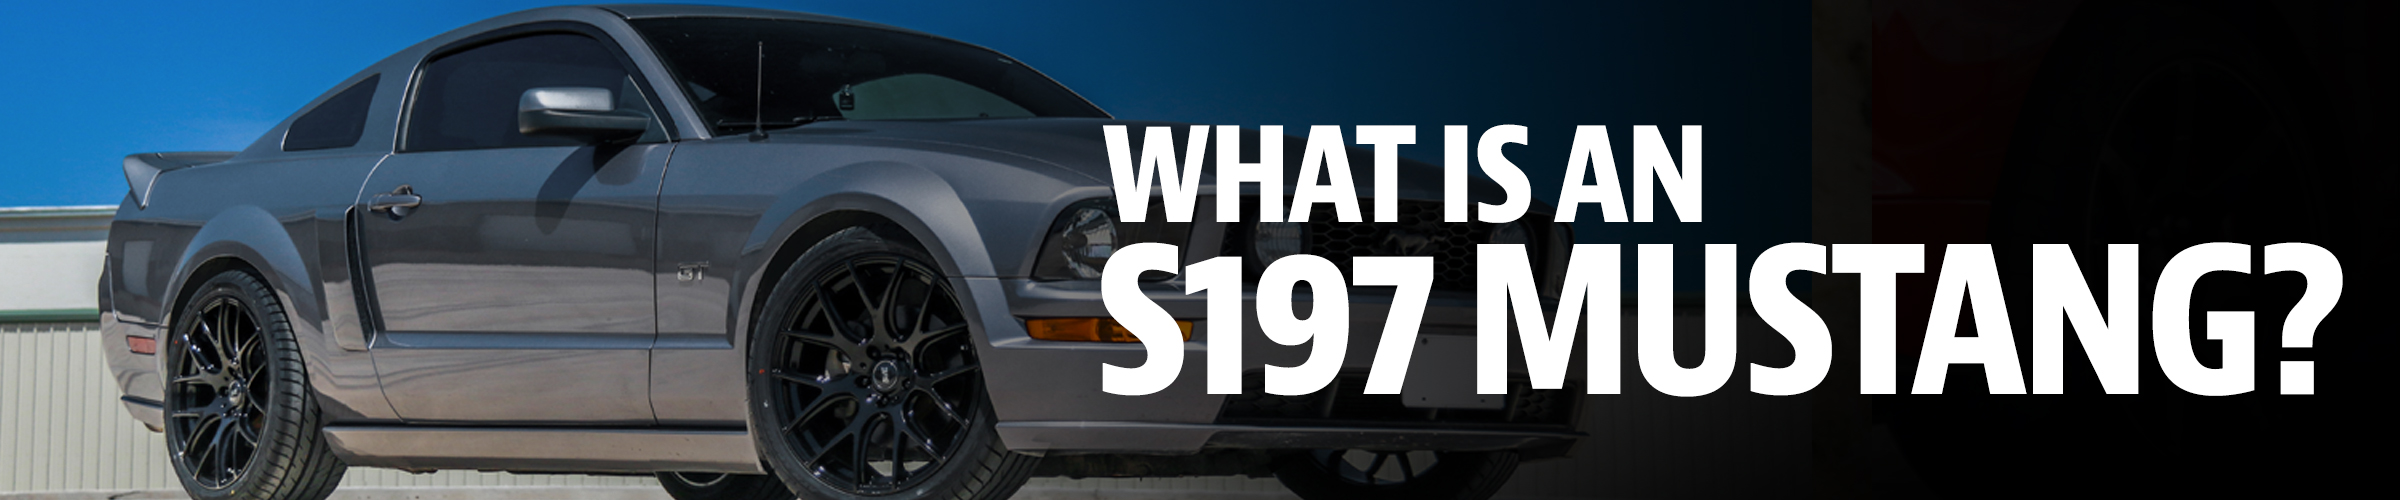 What Is An S197 Mustang?